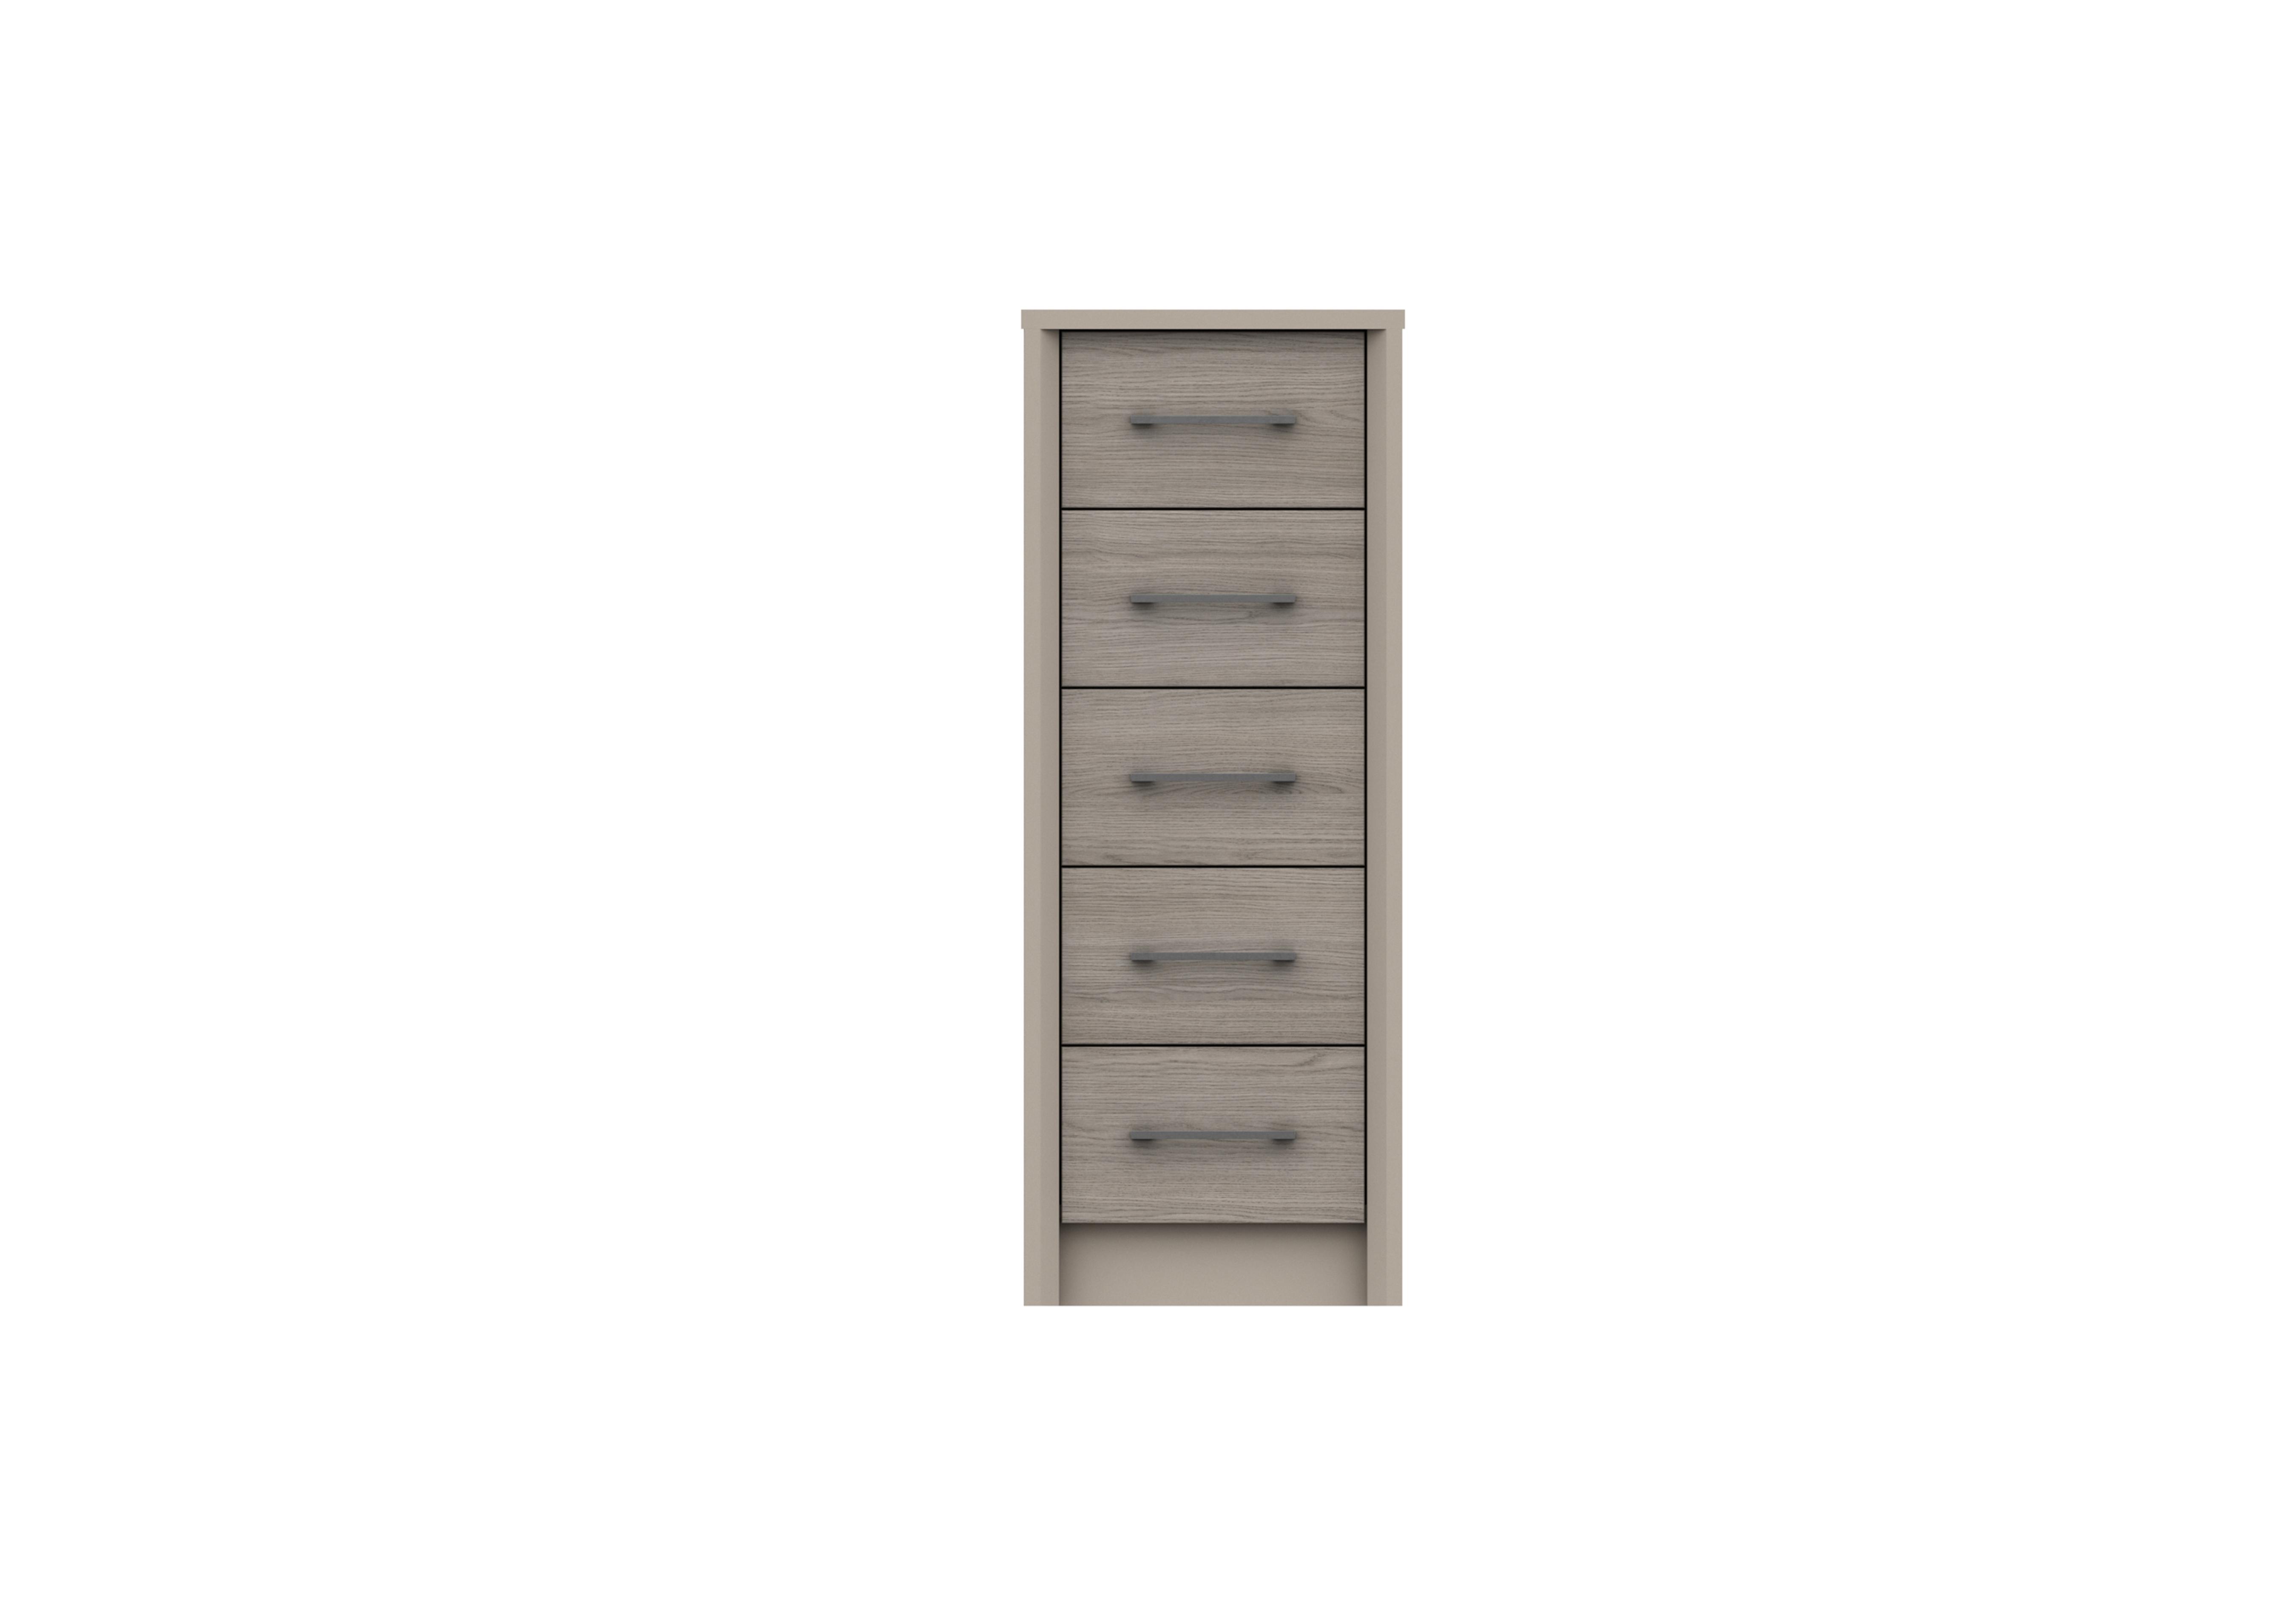 Paddington 5 Drawer Narrow Chest in Fired Earth/Grey Oak on Furniture Village